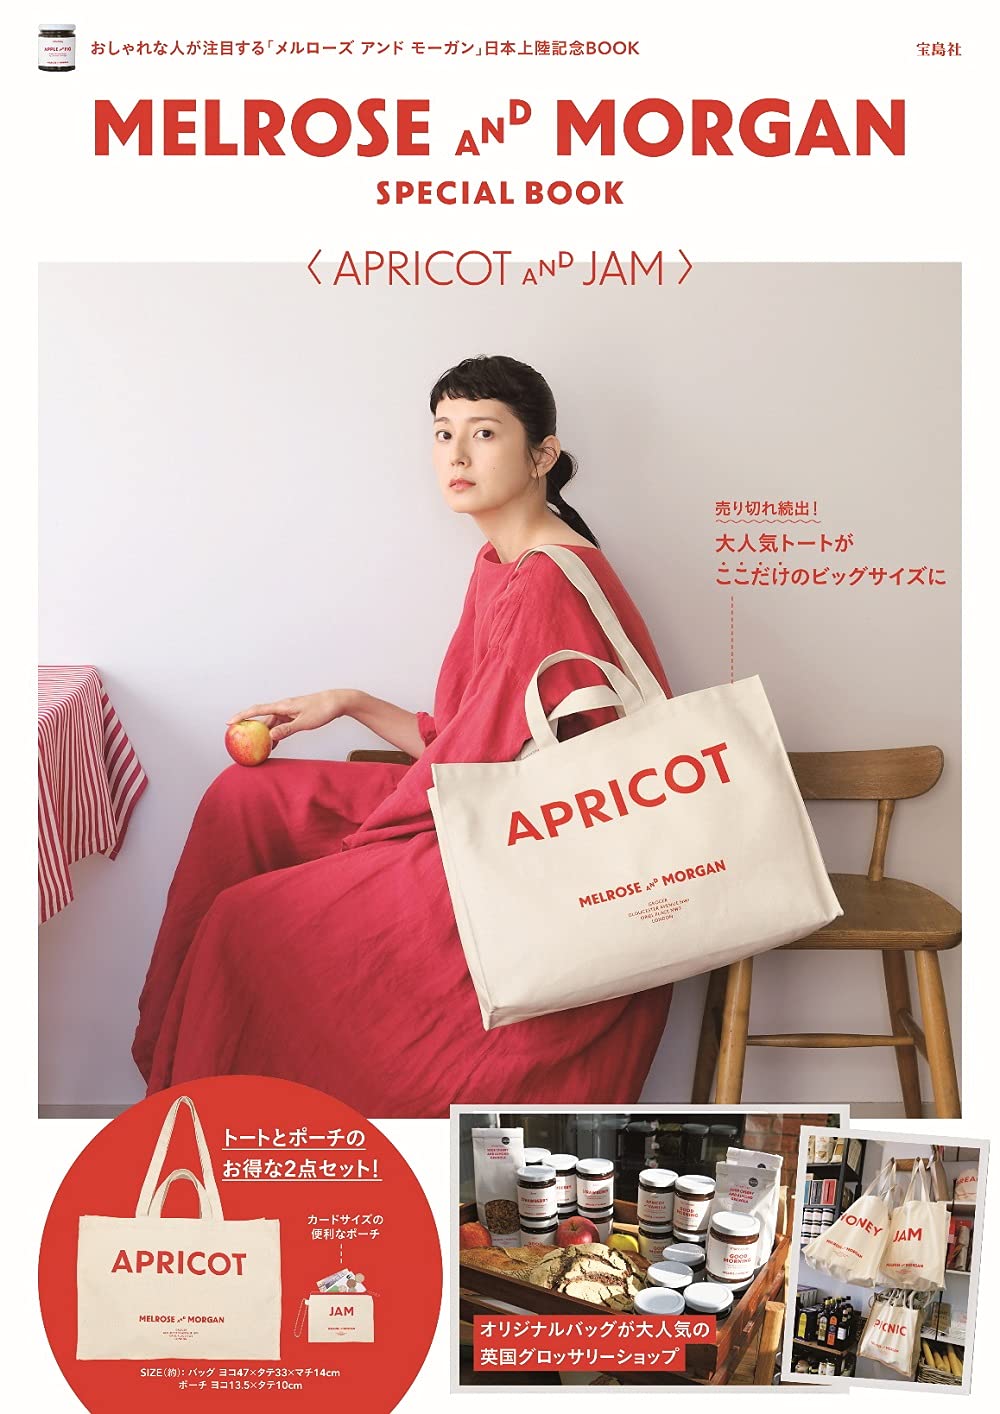 MELROSE AND MORGAN SPECIAL BOOK〈APRICOT & JAM〉